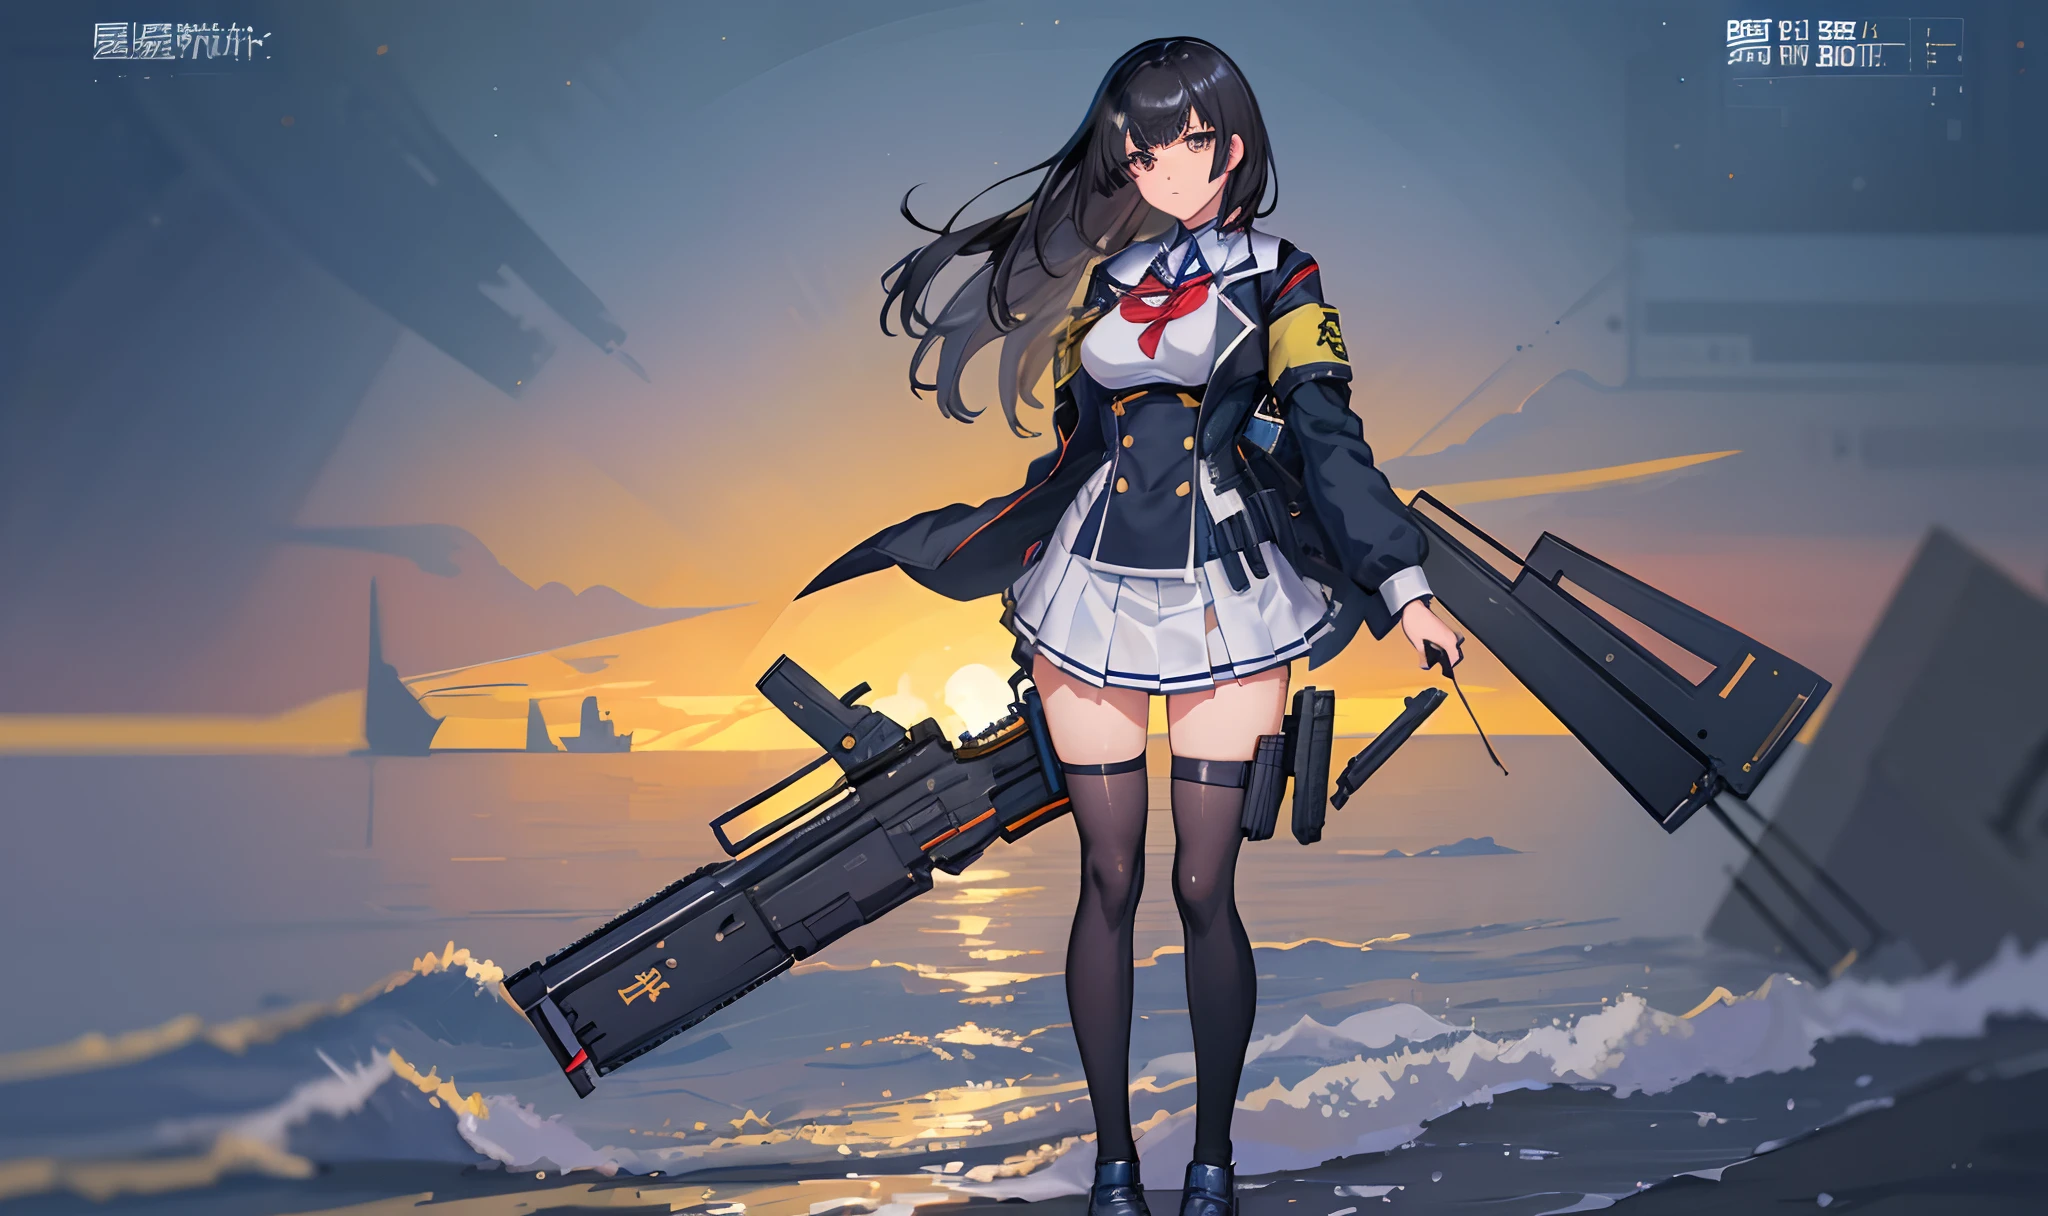 a masterpiece of,(perfect anatomia:1.4), best qualtiy, high_resolution, Fine details, highly detailed and beautiful, Distinct_image, (solo women), ,(huge-breasted), thighhigh,Long Black Hair,Anime girl in short skirt and jacket with jacket on shoulder, Fine details. girls' frontline, girls frontline style, from girls frontline, girls frontline cg, anime full body illustration, Realistic , marin kitagawa fanart, girls frontline universe, girls' frontline, a hyperrealistic , full-body xianxia